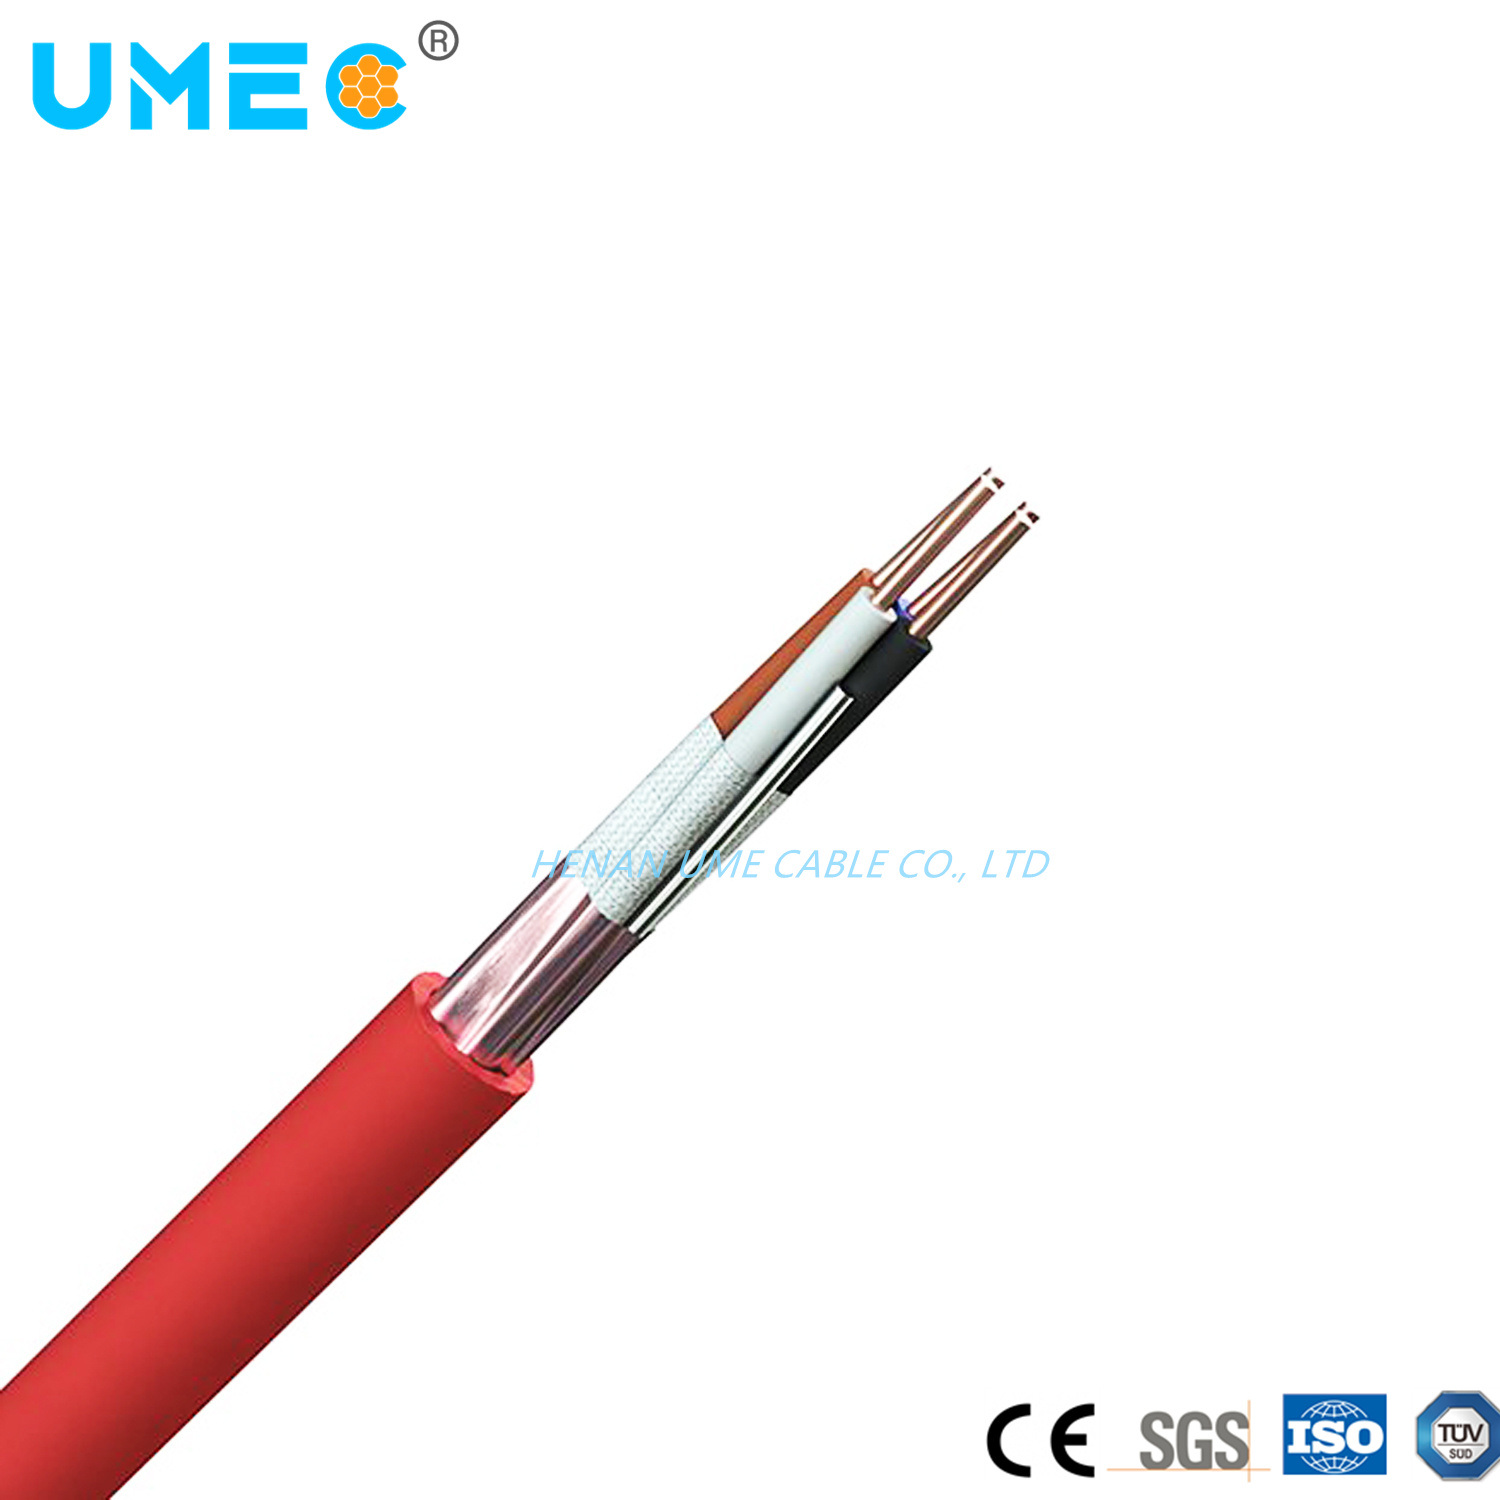 Wholesale Factory Direct Fire Alarm Cable Aluminum Foil Shielded Wire and Cable 2/4/6cx22 Fire Alarm Cable